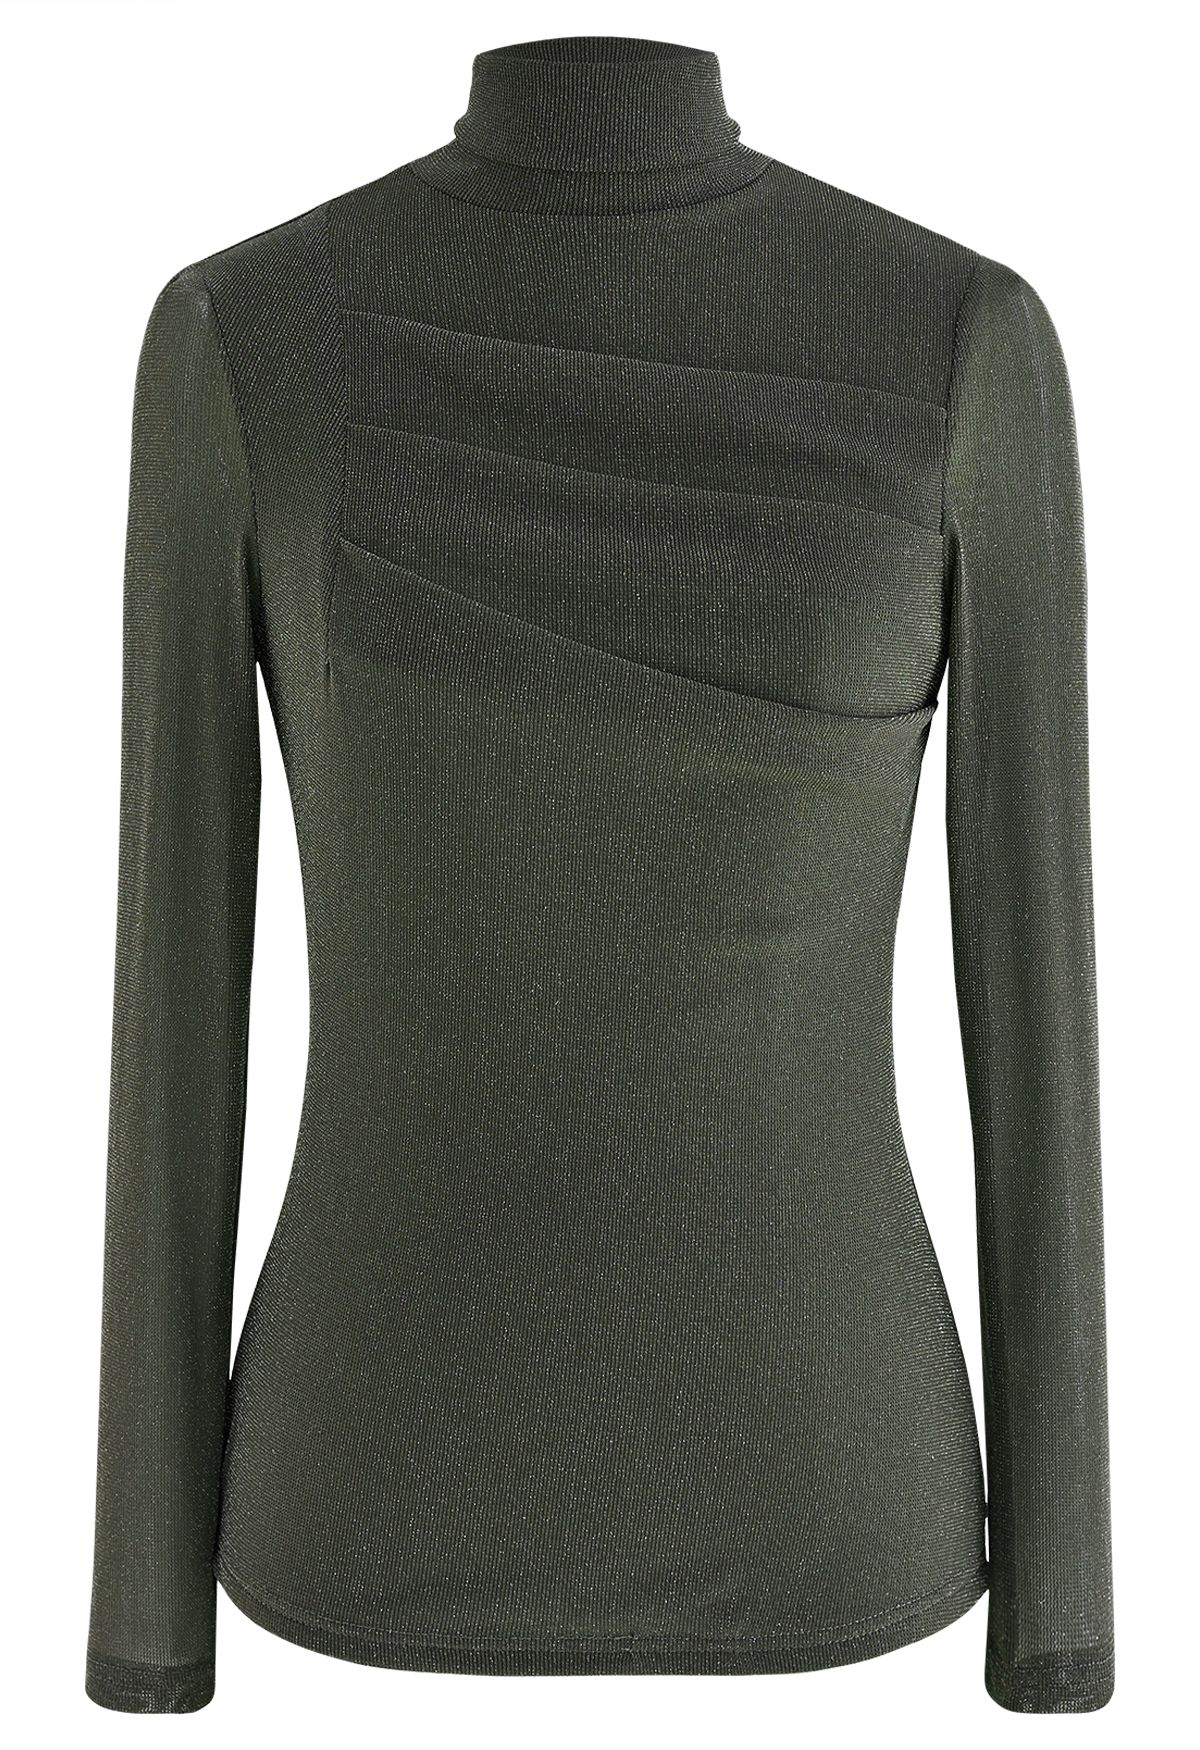 Shimmer Mesh Pleated High Neck Top in Army Green